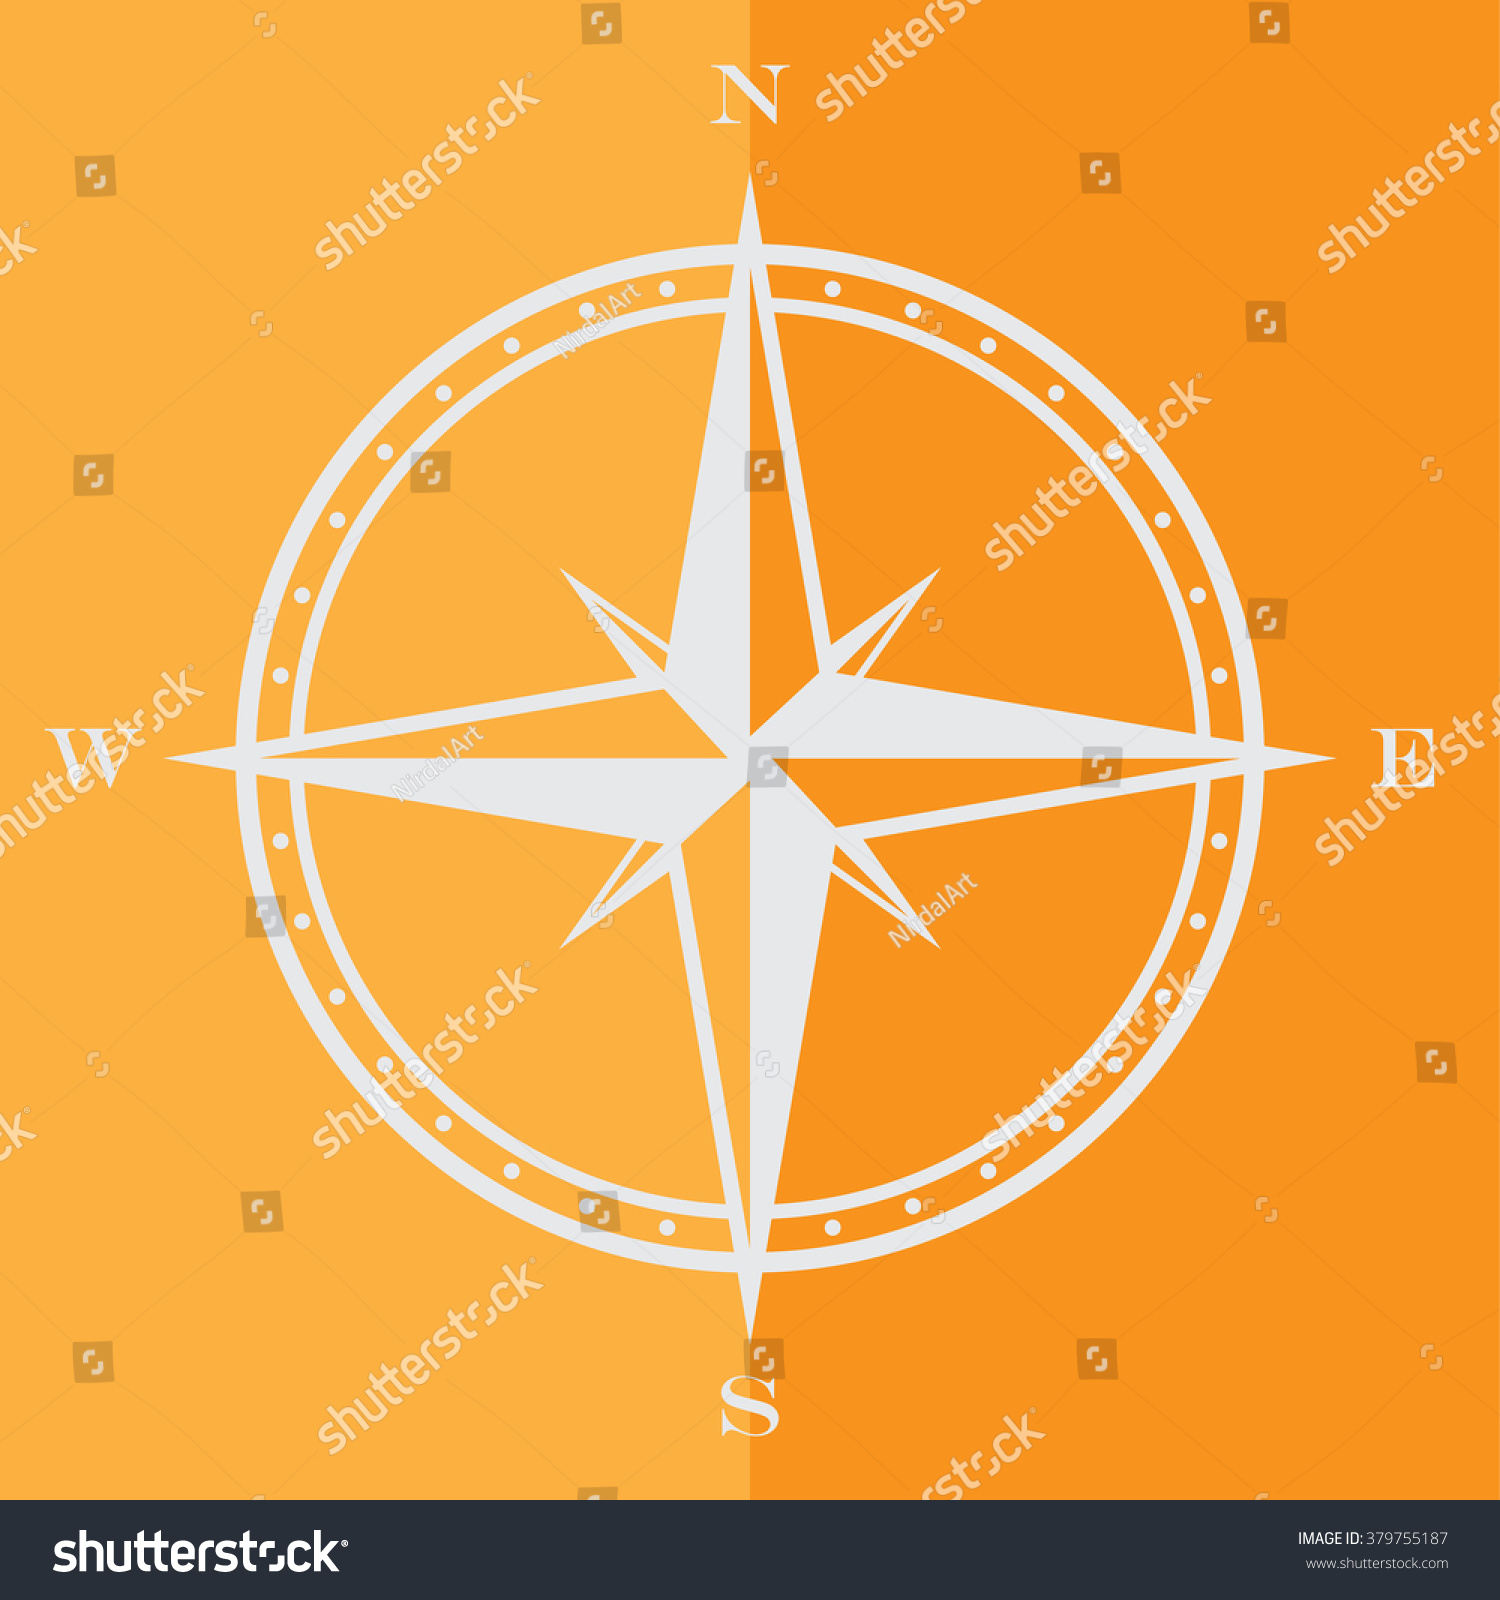 Compass Rose Symbol Stock Vector Royalty Free 379755187 Shutterstock 7563